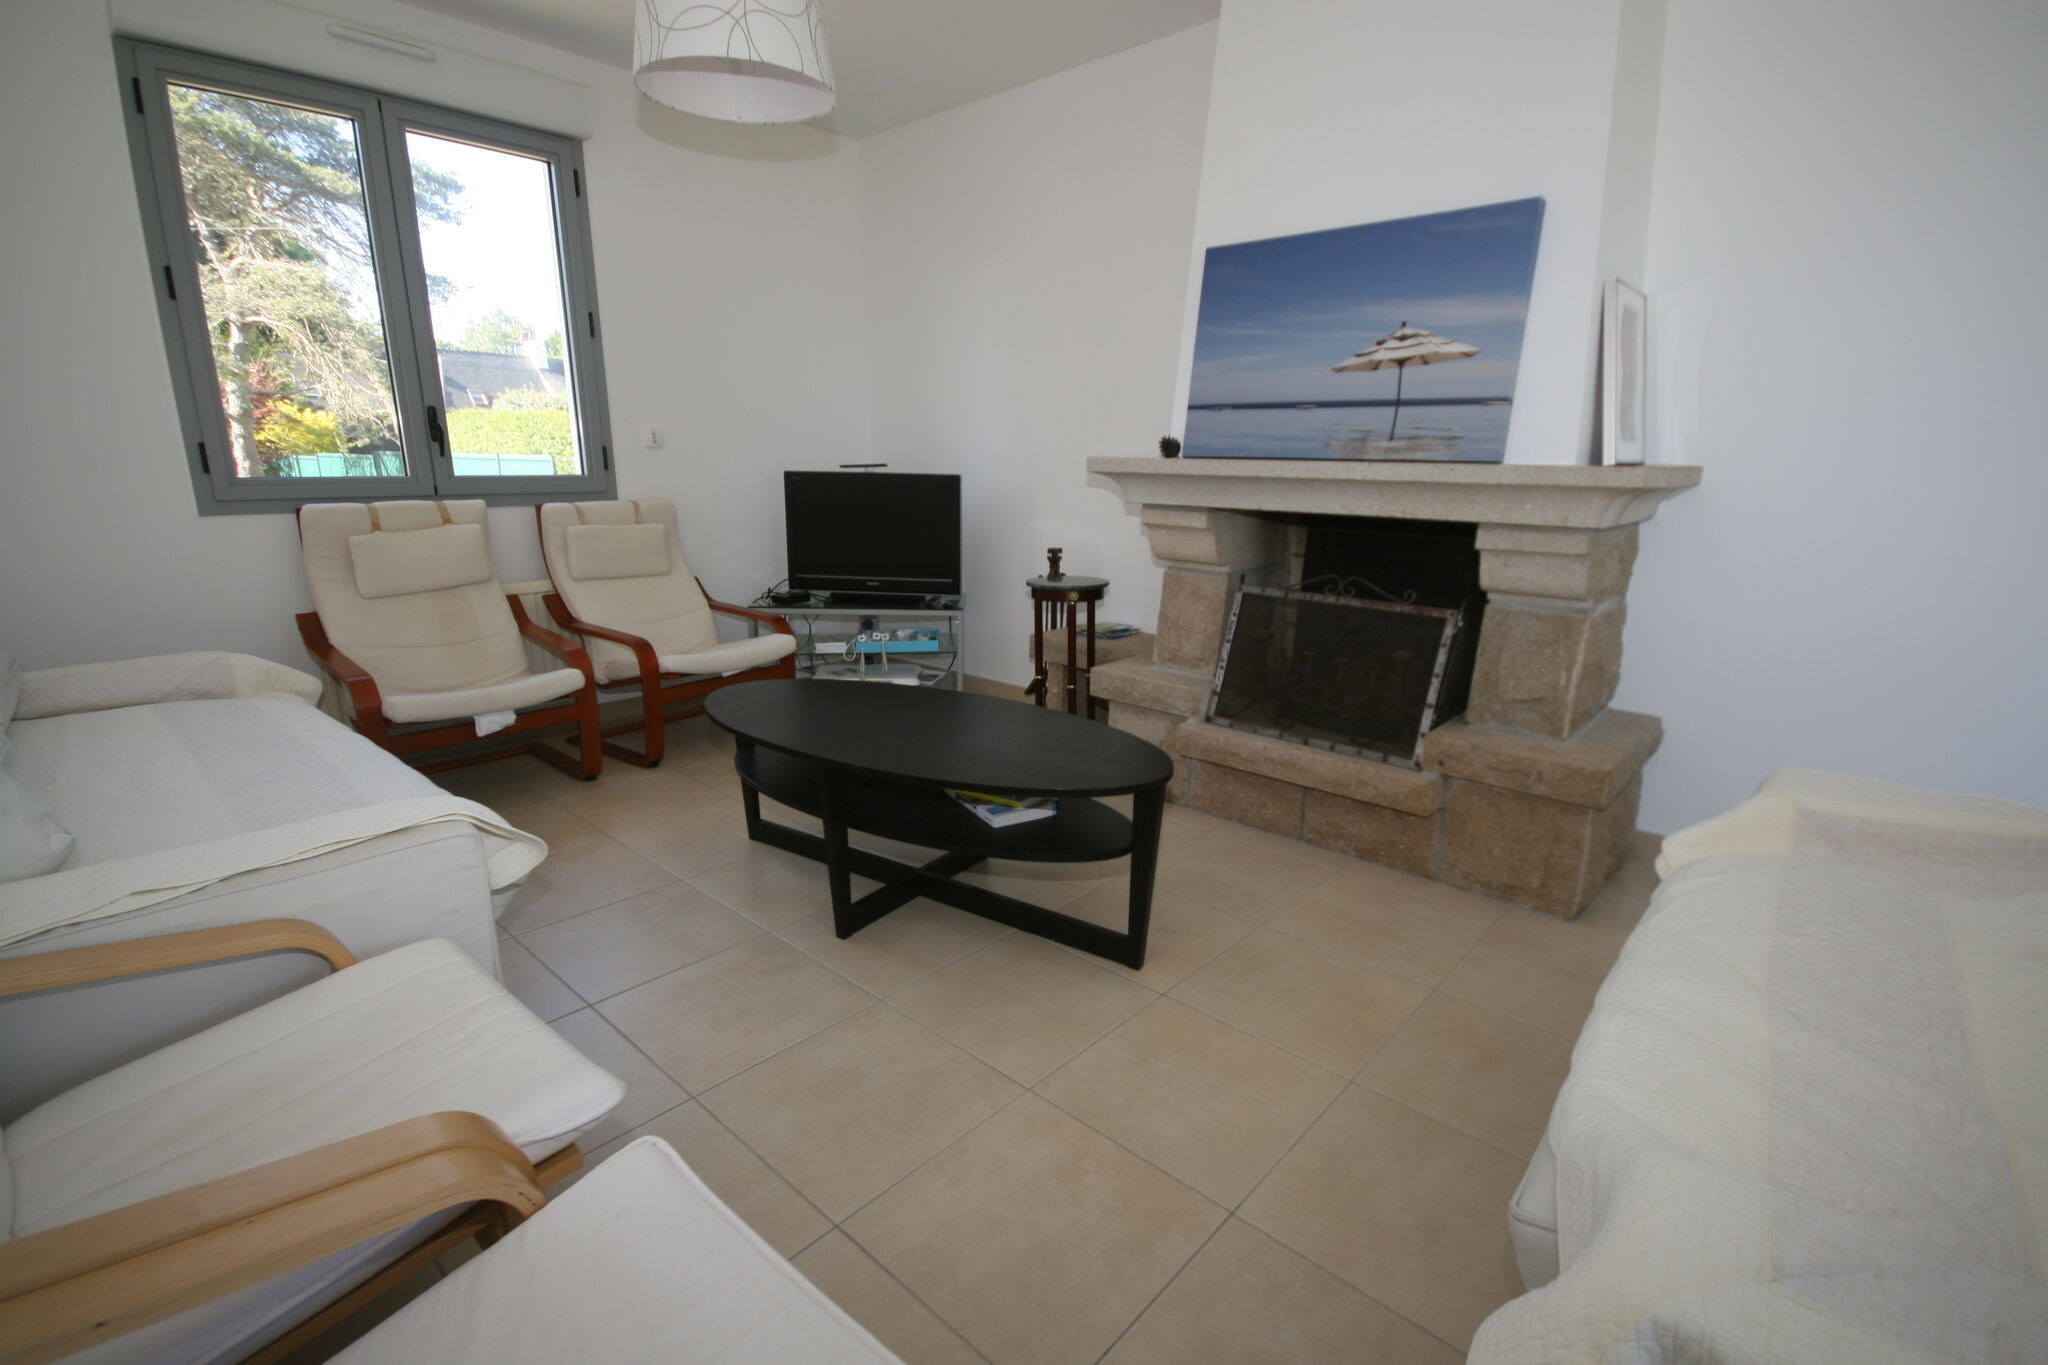 Spacious villa with heated indoor pool and large garden, at 8 km from the sea